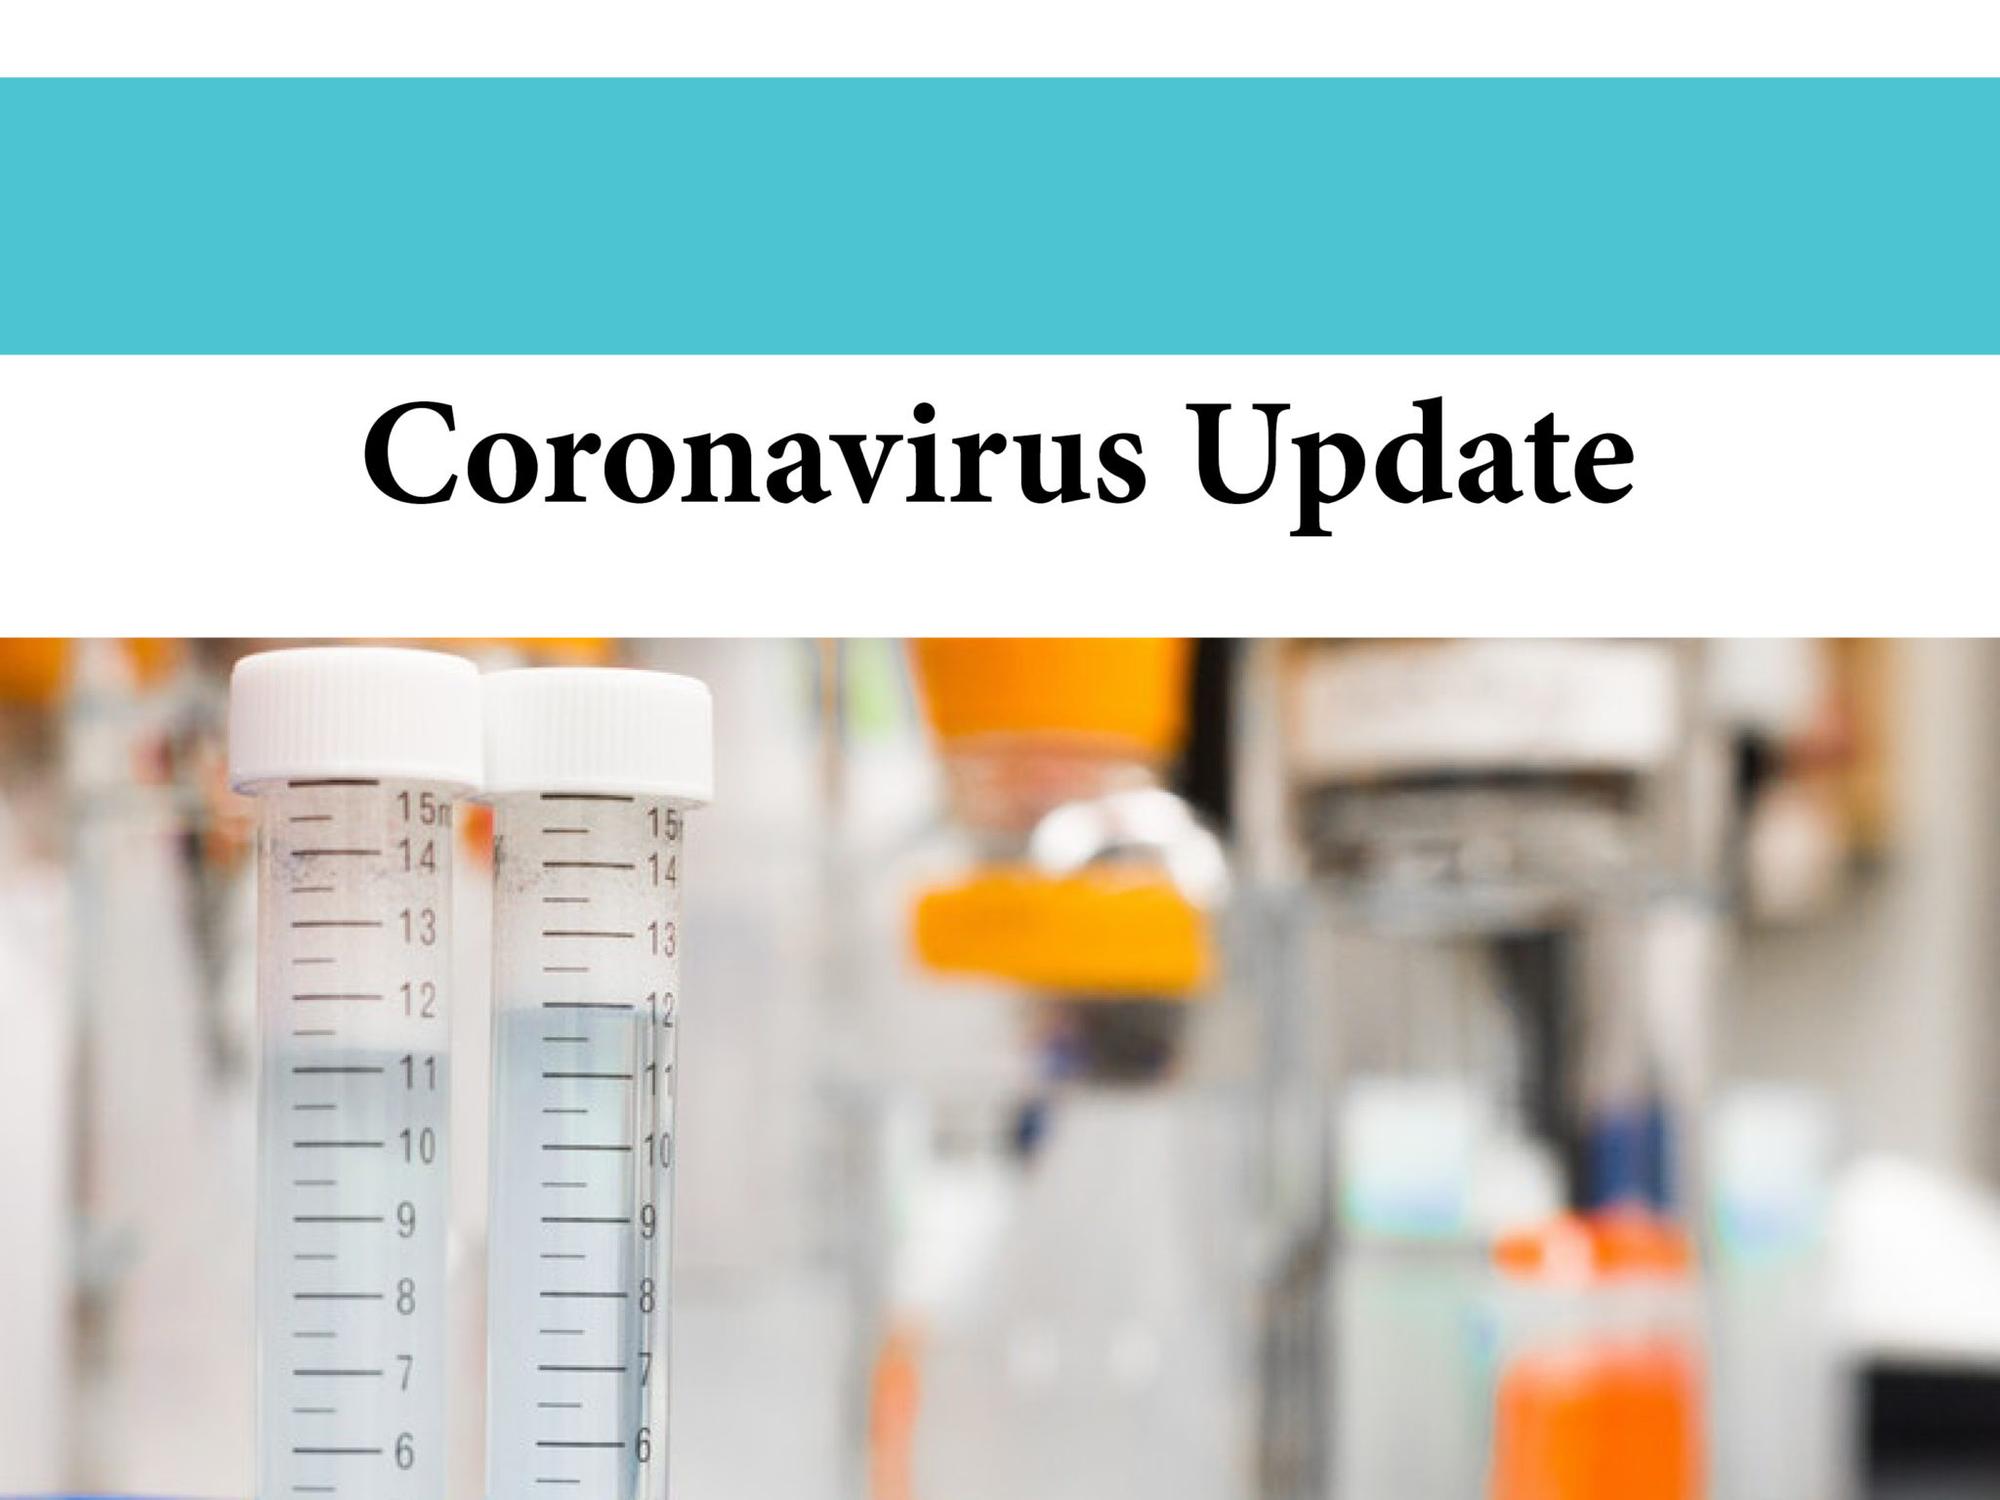 19 active COVID-19 cases across EOHU territory as of September 11